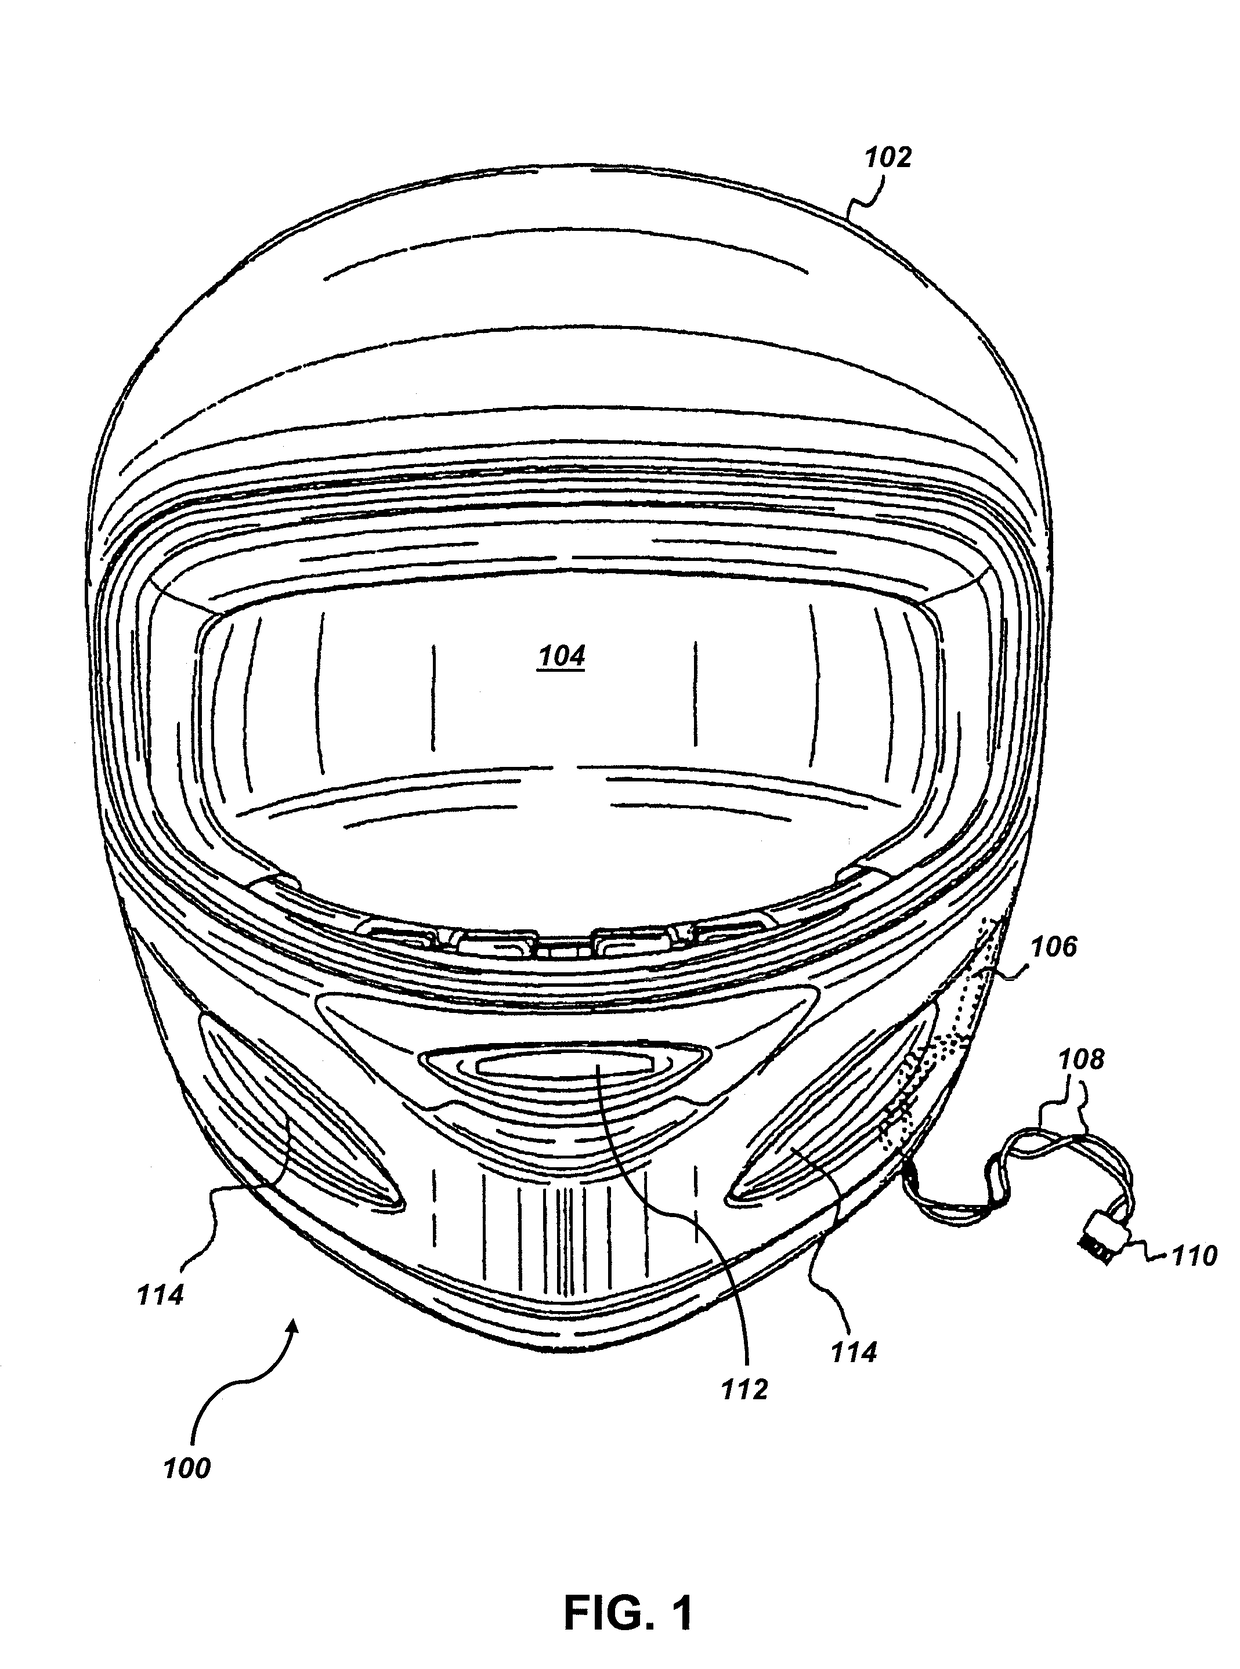 Electrical system for helmets and helmets so equipped